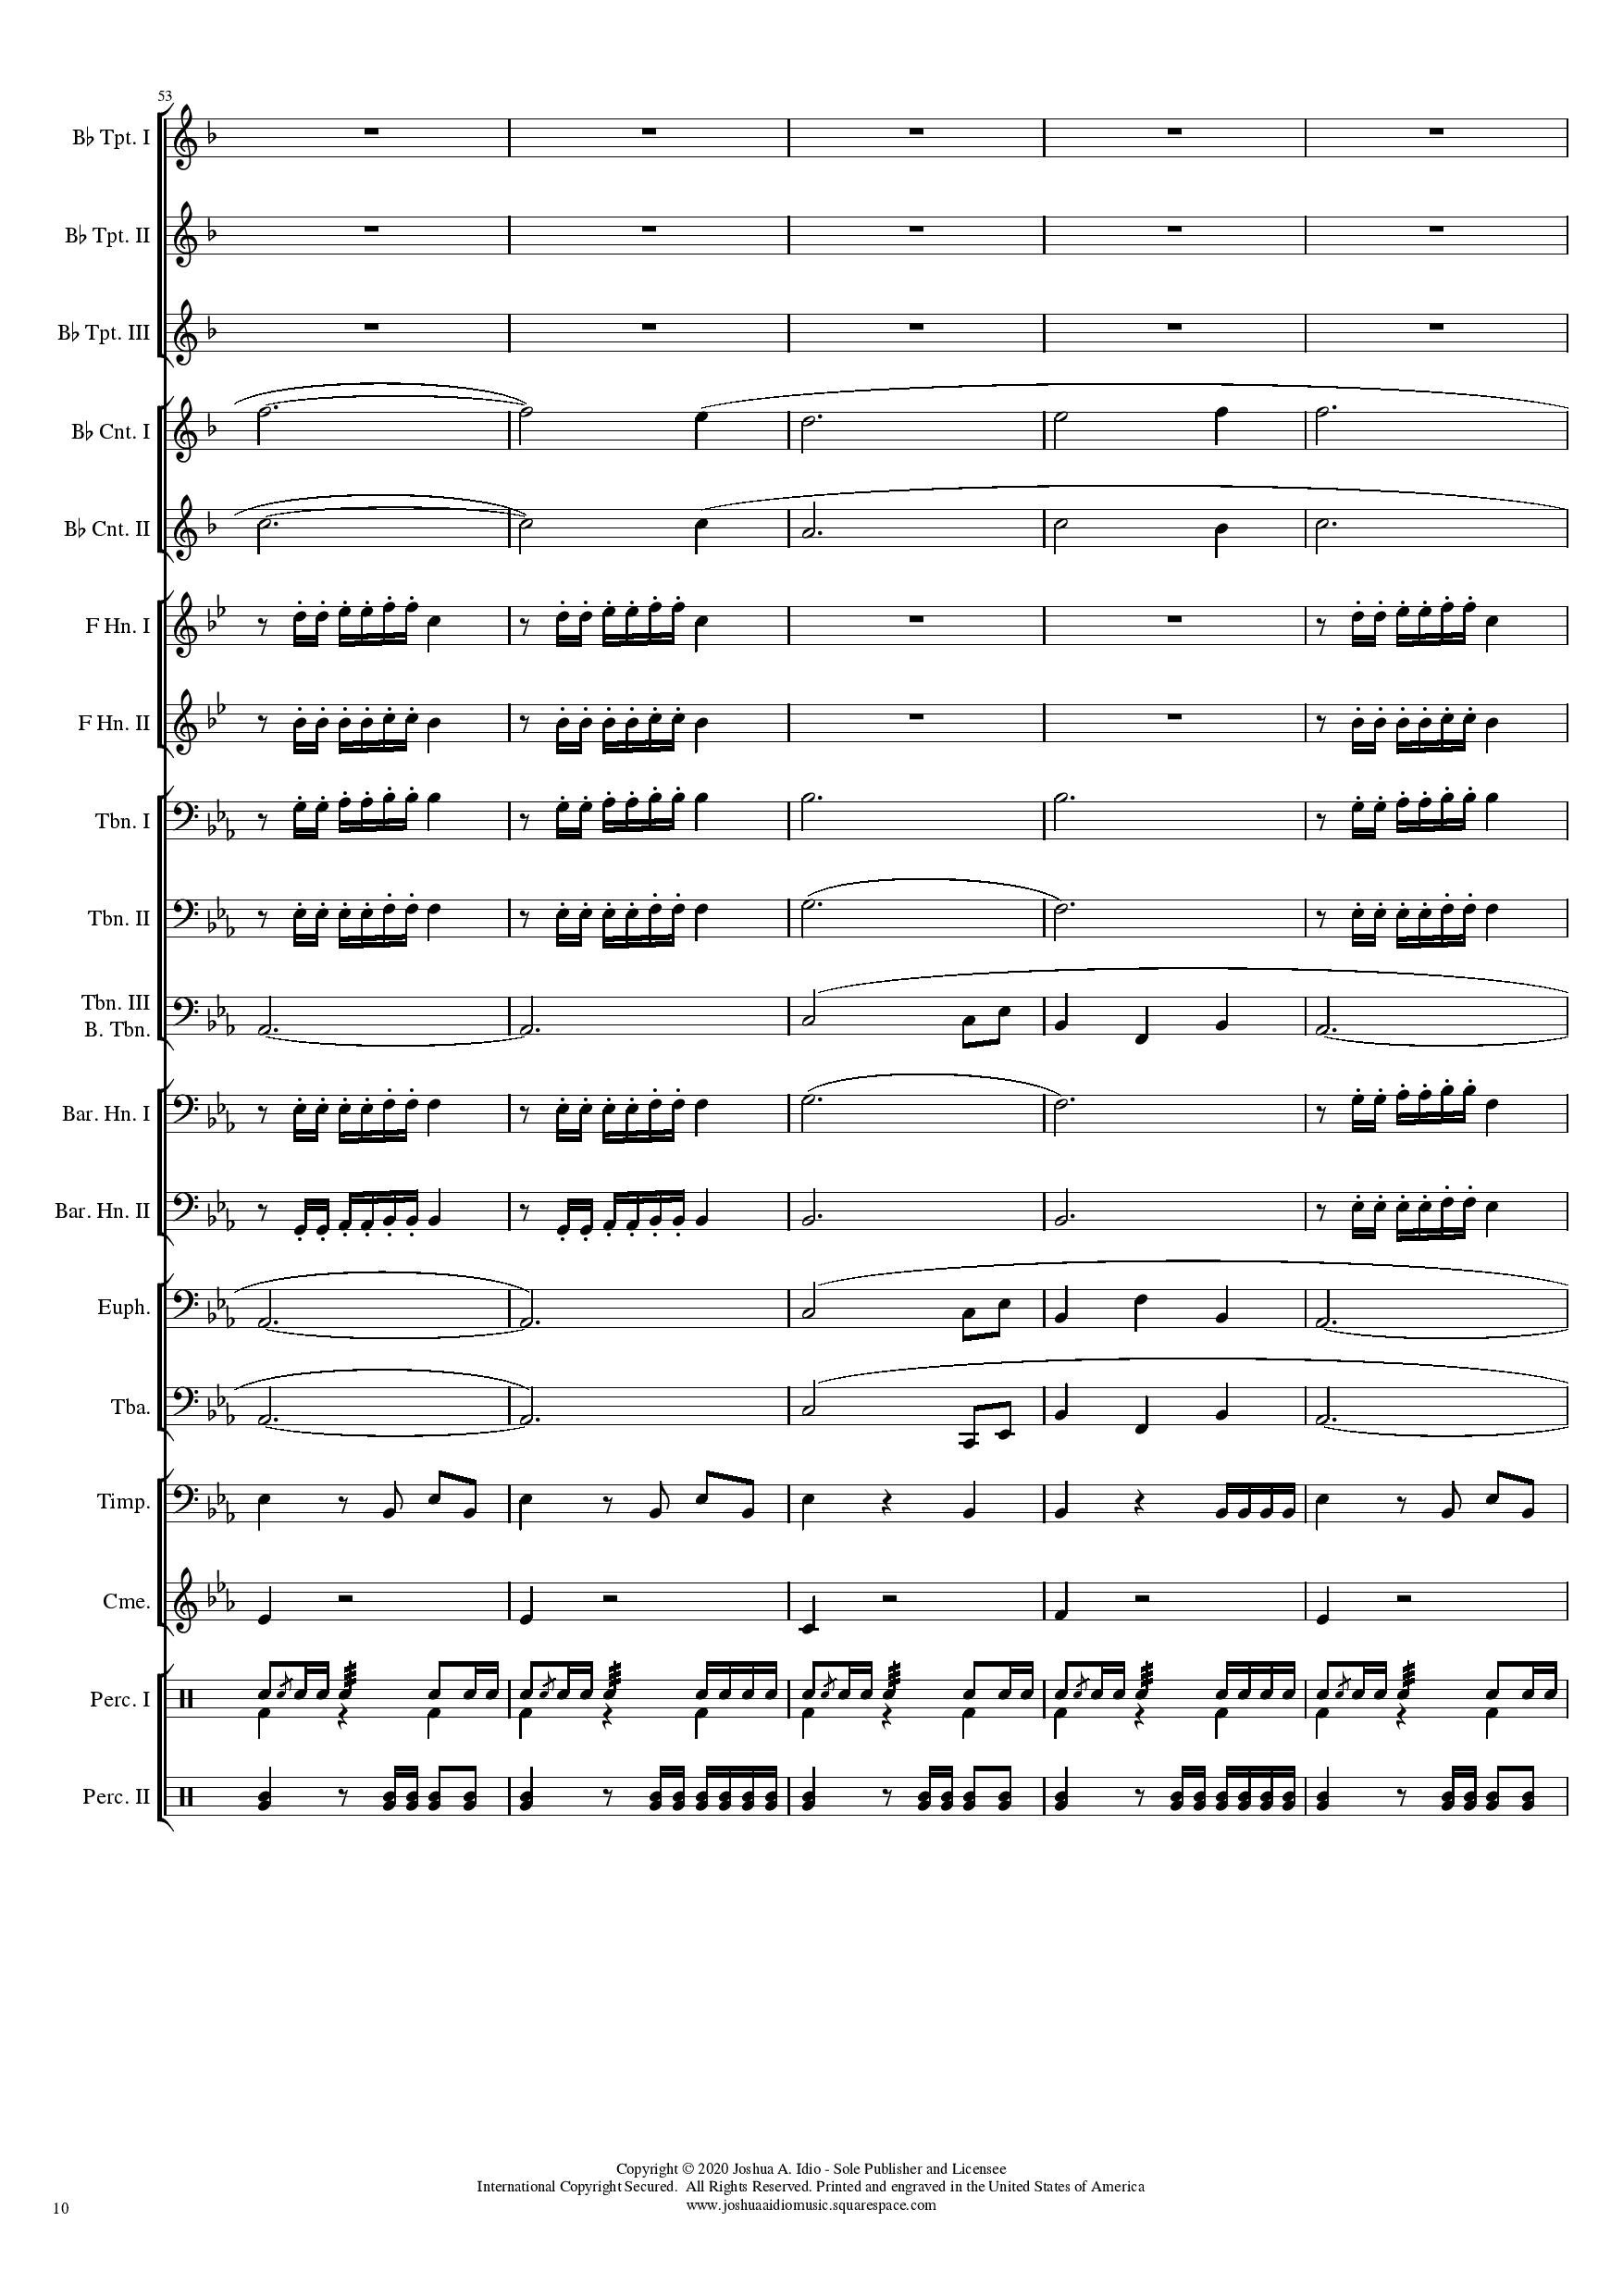 The Procession of Scholars - Conductor s Score-page-010.jpg